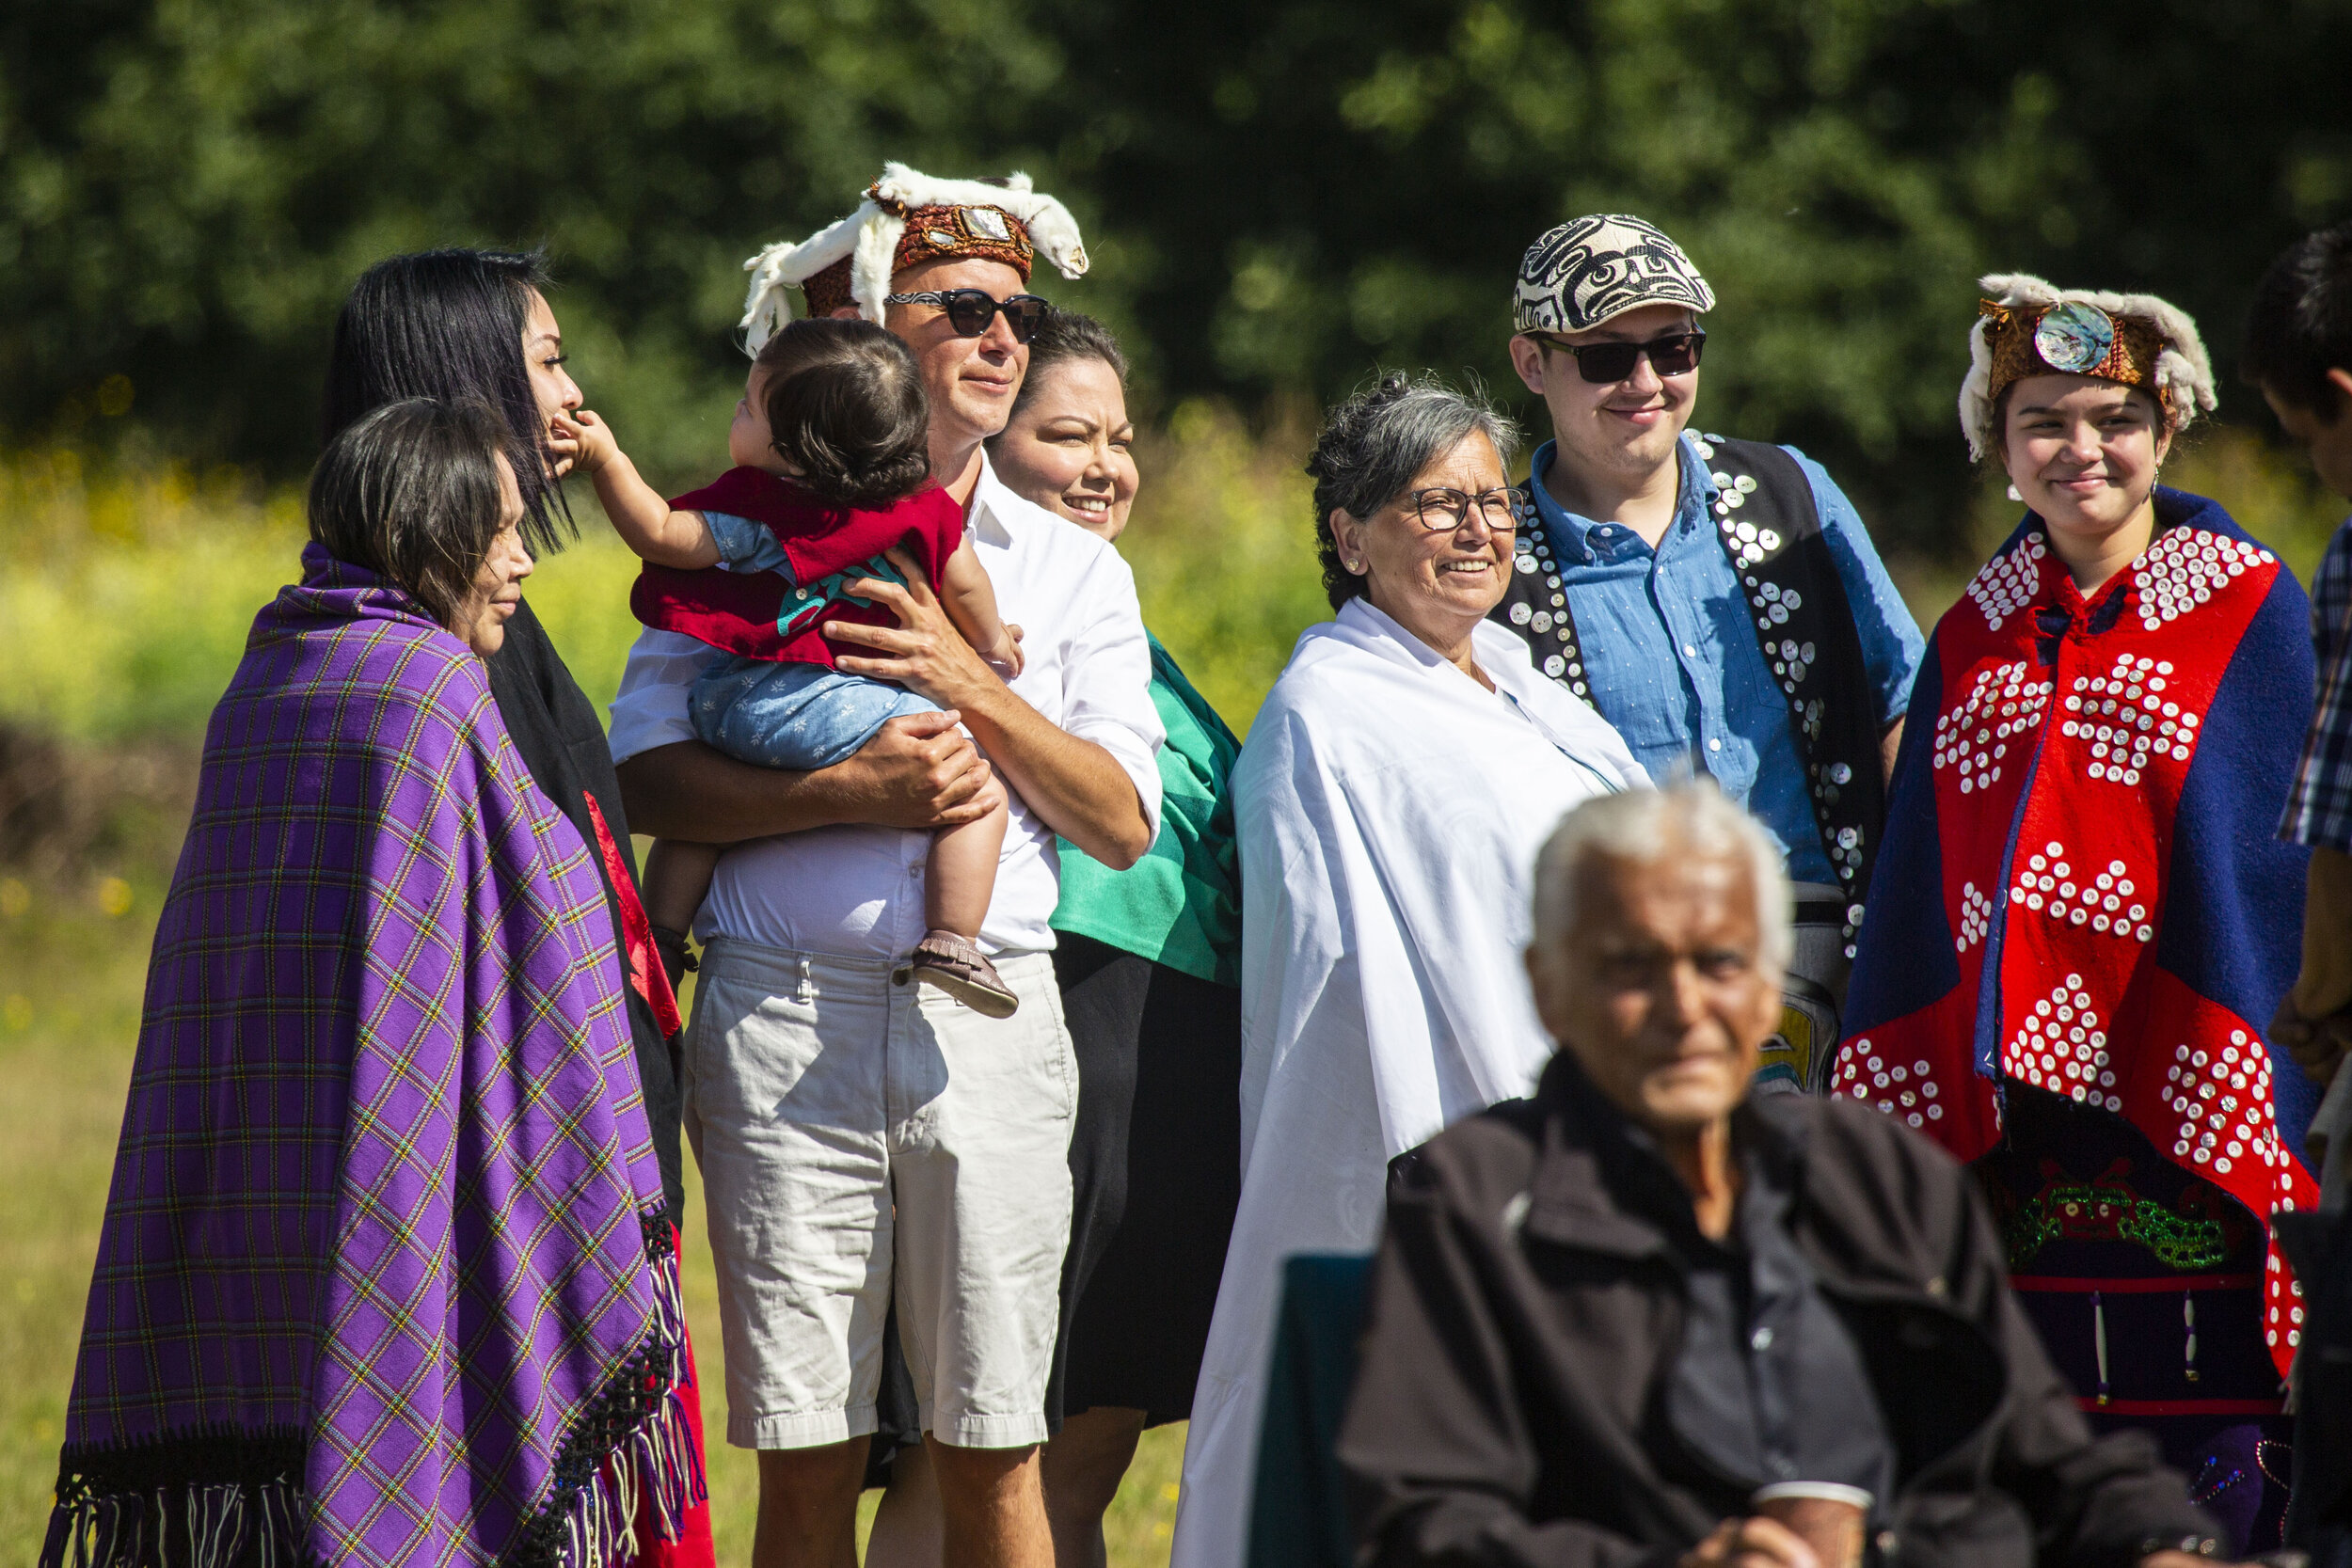  Chief Earnest Alfred, K̓wak̓waba̱'las, elected council member of the 'Na̱mg̱is First Nation traditional leader of the Ławit̓sis First Nation, with his family at the naming ceremony for his grand daughter in Alert Bay. Alfred was instrumental in the 